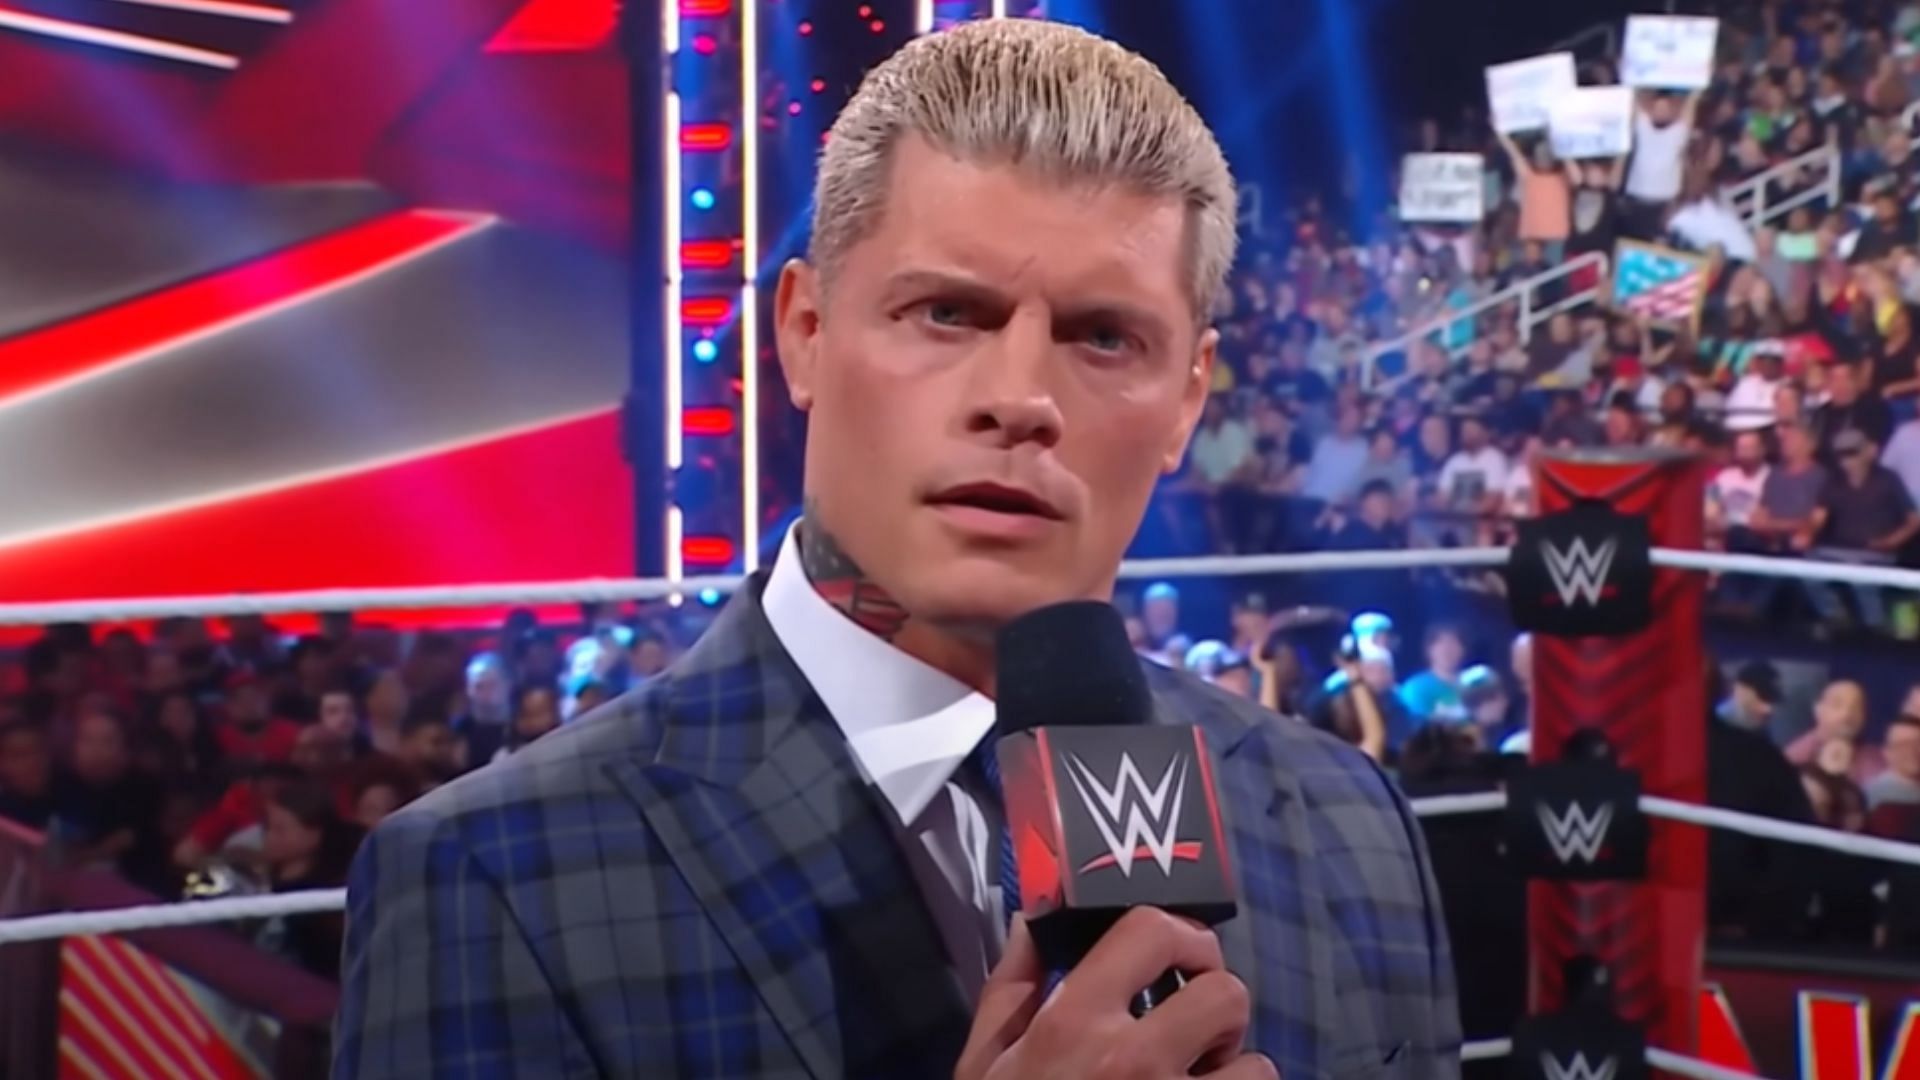 Cody Rhodes is one of WWE